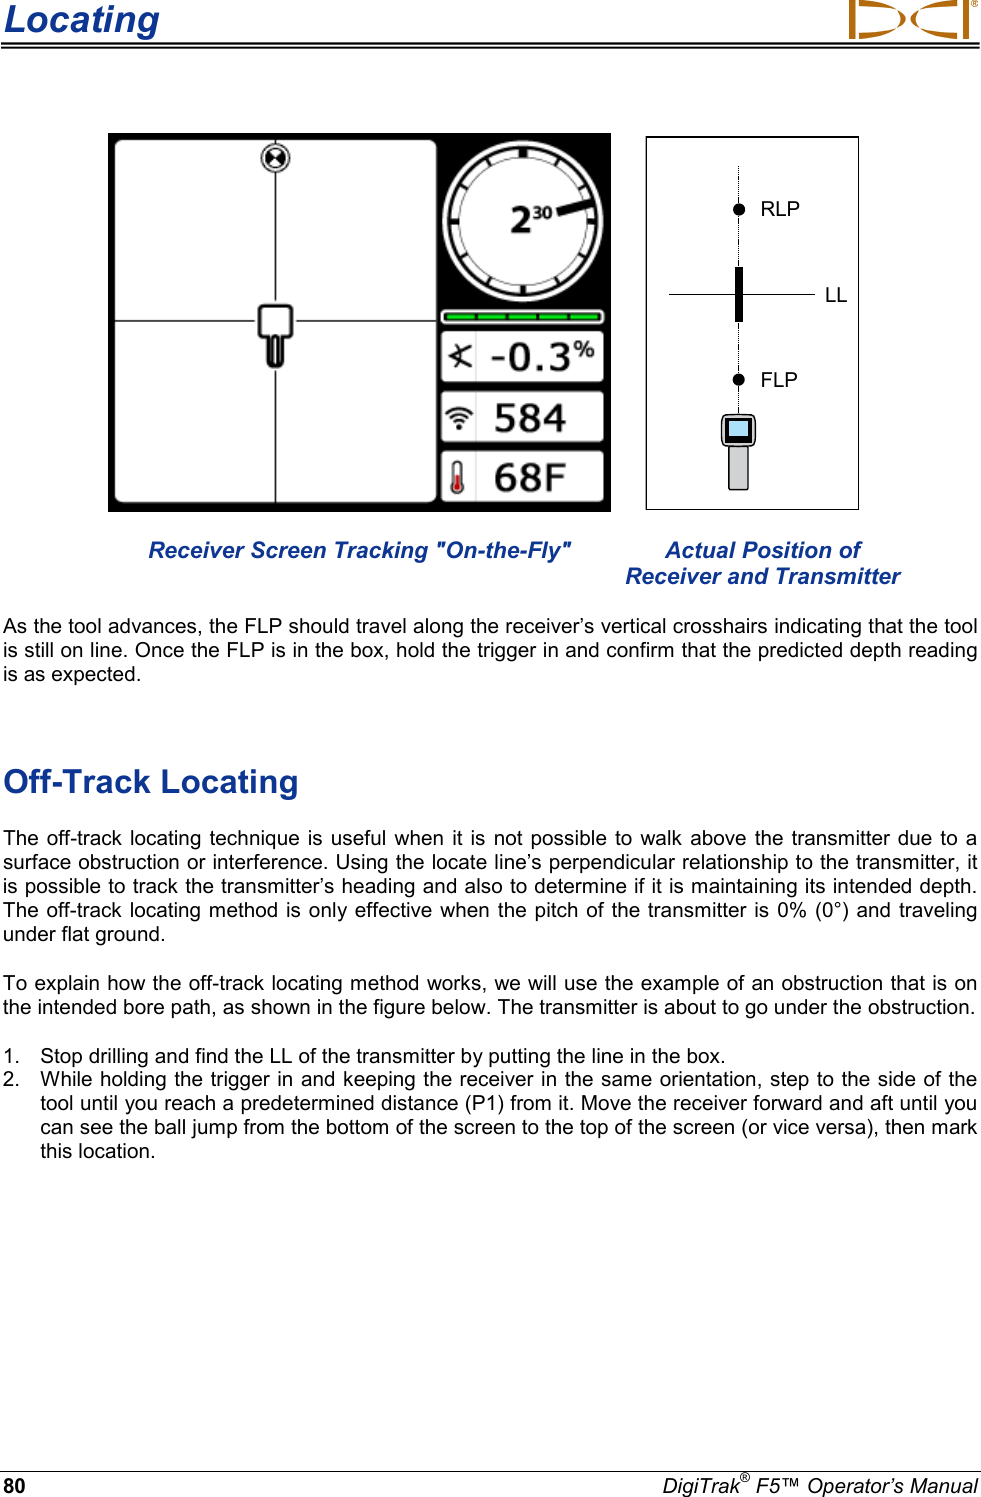 Locating     80 DigiTrak® F5™ Operator’s Manual    RLPFLPLL Receiver Screen Tracking &quot;On-the-Fly&quot; Actual Position of Receiver and Transmitter As the tool advances, the FLP should travel along the receiver’s vertical crosshairs indicating that the tool is still on line. Once the FLP is in the box, hold the trigger in and confirm that the predicted depth reading is as expected.  Off-Track Locating The off-track locating technique is useful when it is not possible to walk above the transmitter due to a surface obstruction or interference. Using the locate line’s perpendicular relationship to the transmitter, it is possible to track the transmitter’s heading and also to determine if it is maintaining its intended depth. The off-track locating method is only effective when the pitch of the transmitter is 0% (0°) and traveling under flat ground. To explain how the off-track locating method works, we will use the example of an obstruction that is on the intended bore path, as shown in the figure below. The transmitter is about to go under the obstruction. 1. Stop drilling and find the LL of the transmitter by putting the line in the box. 2. While holding the trigger in and keeping the receiver in the same orientation, step to the side of the tool until you reach a predetermined distance (P1) from it. Move the receiver forward and aft until you can see the ball jump from the bottom of the screen to the top of the screen (or vice versa), then mark this location. 